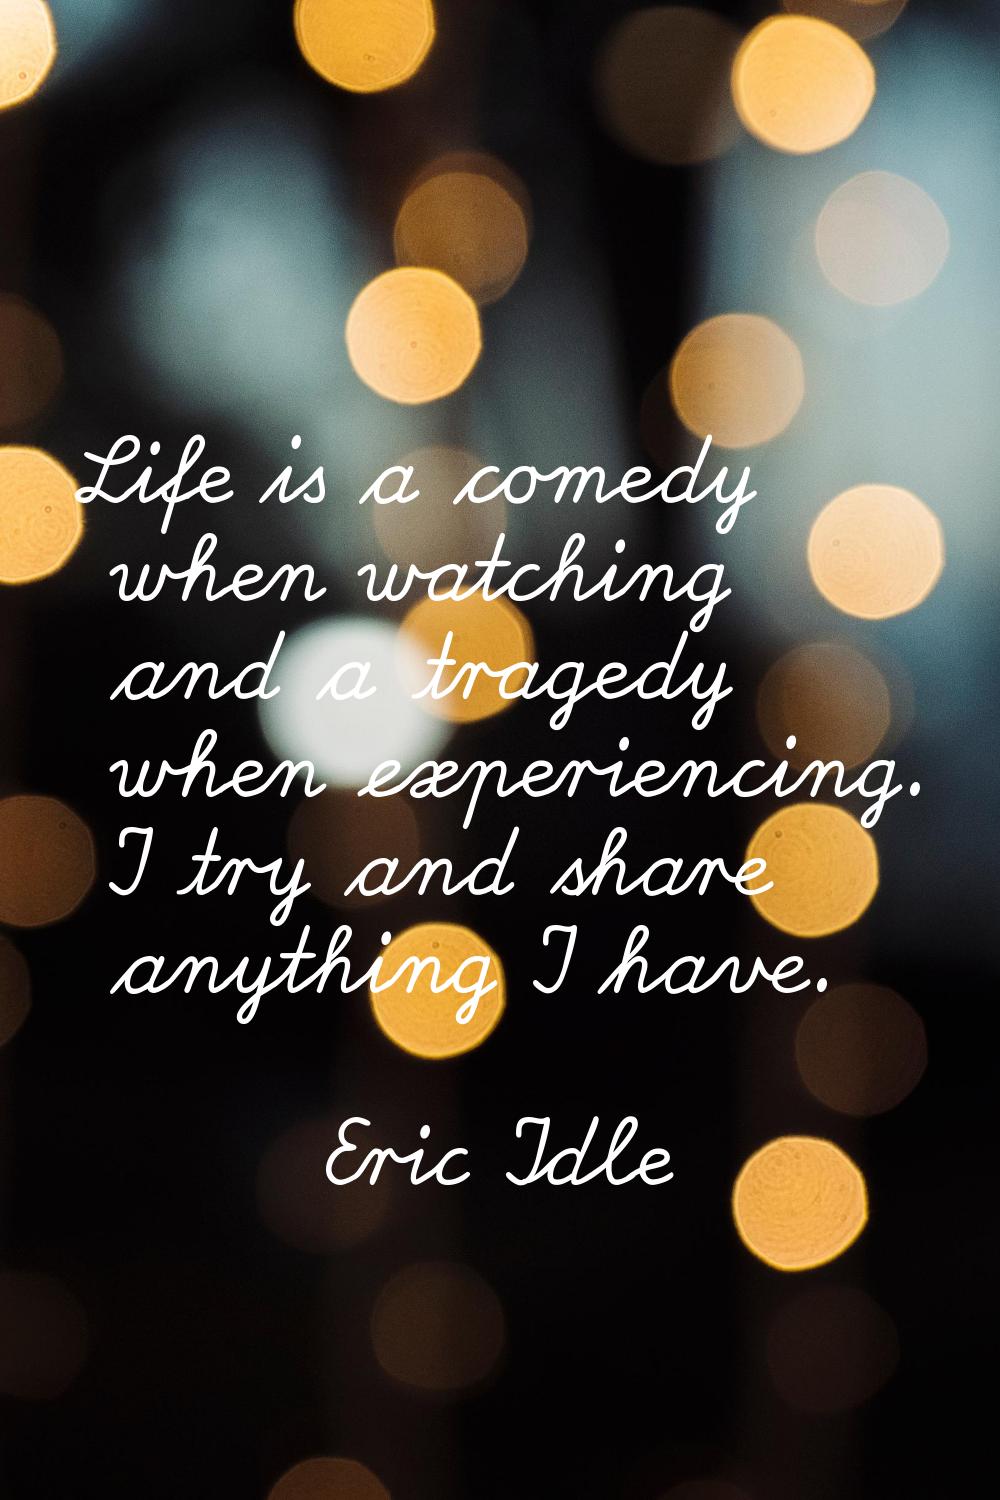 Life is a comedy when watching and a tragedy when experiencing. I try and share anything I have.